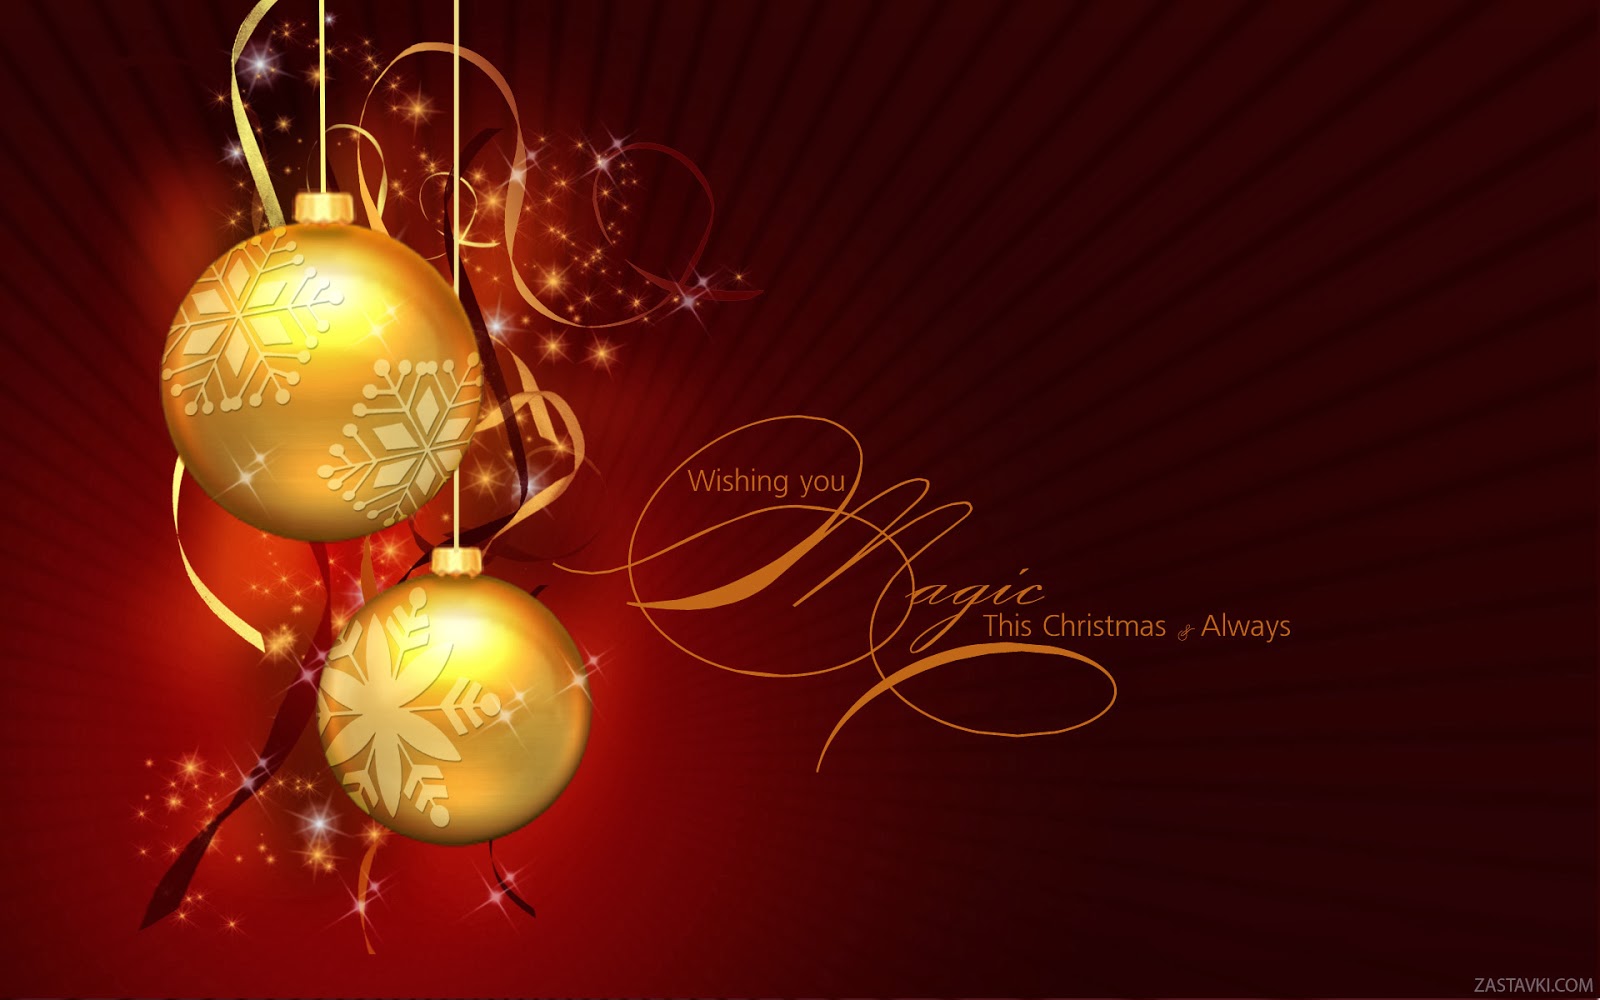 Happy Christmas beautiful wishes text quotes wallpapers HD 